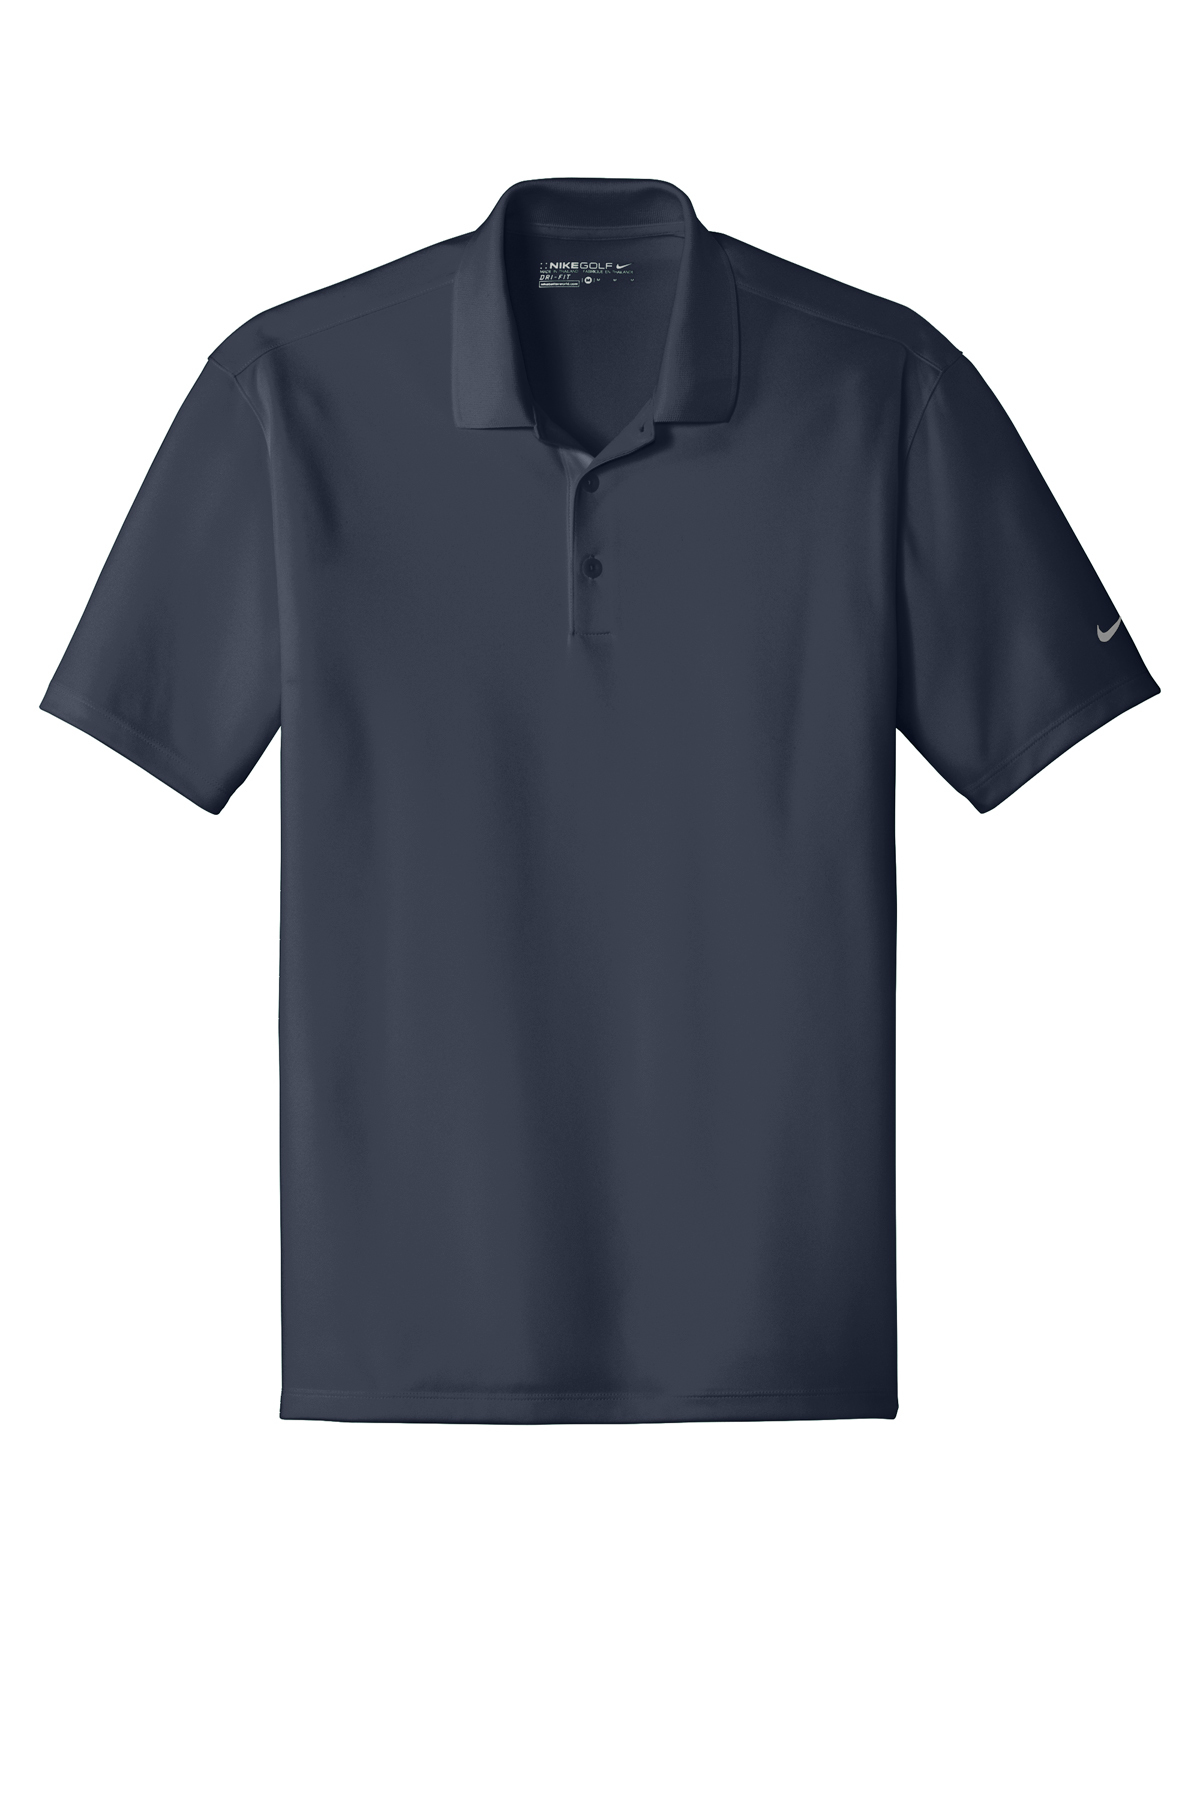 Nike Dri-FIT Classic Fit Players Polo with Flat Knit Collar | Product ...